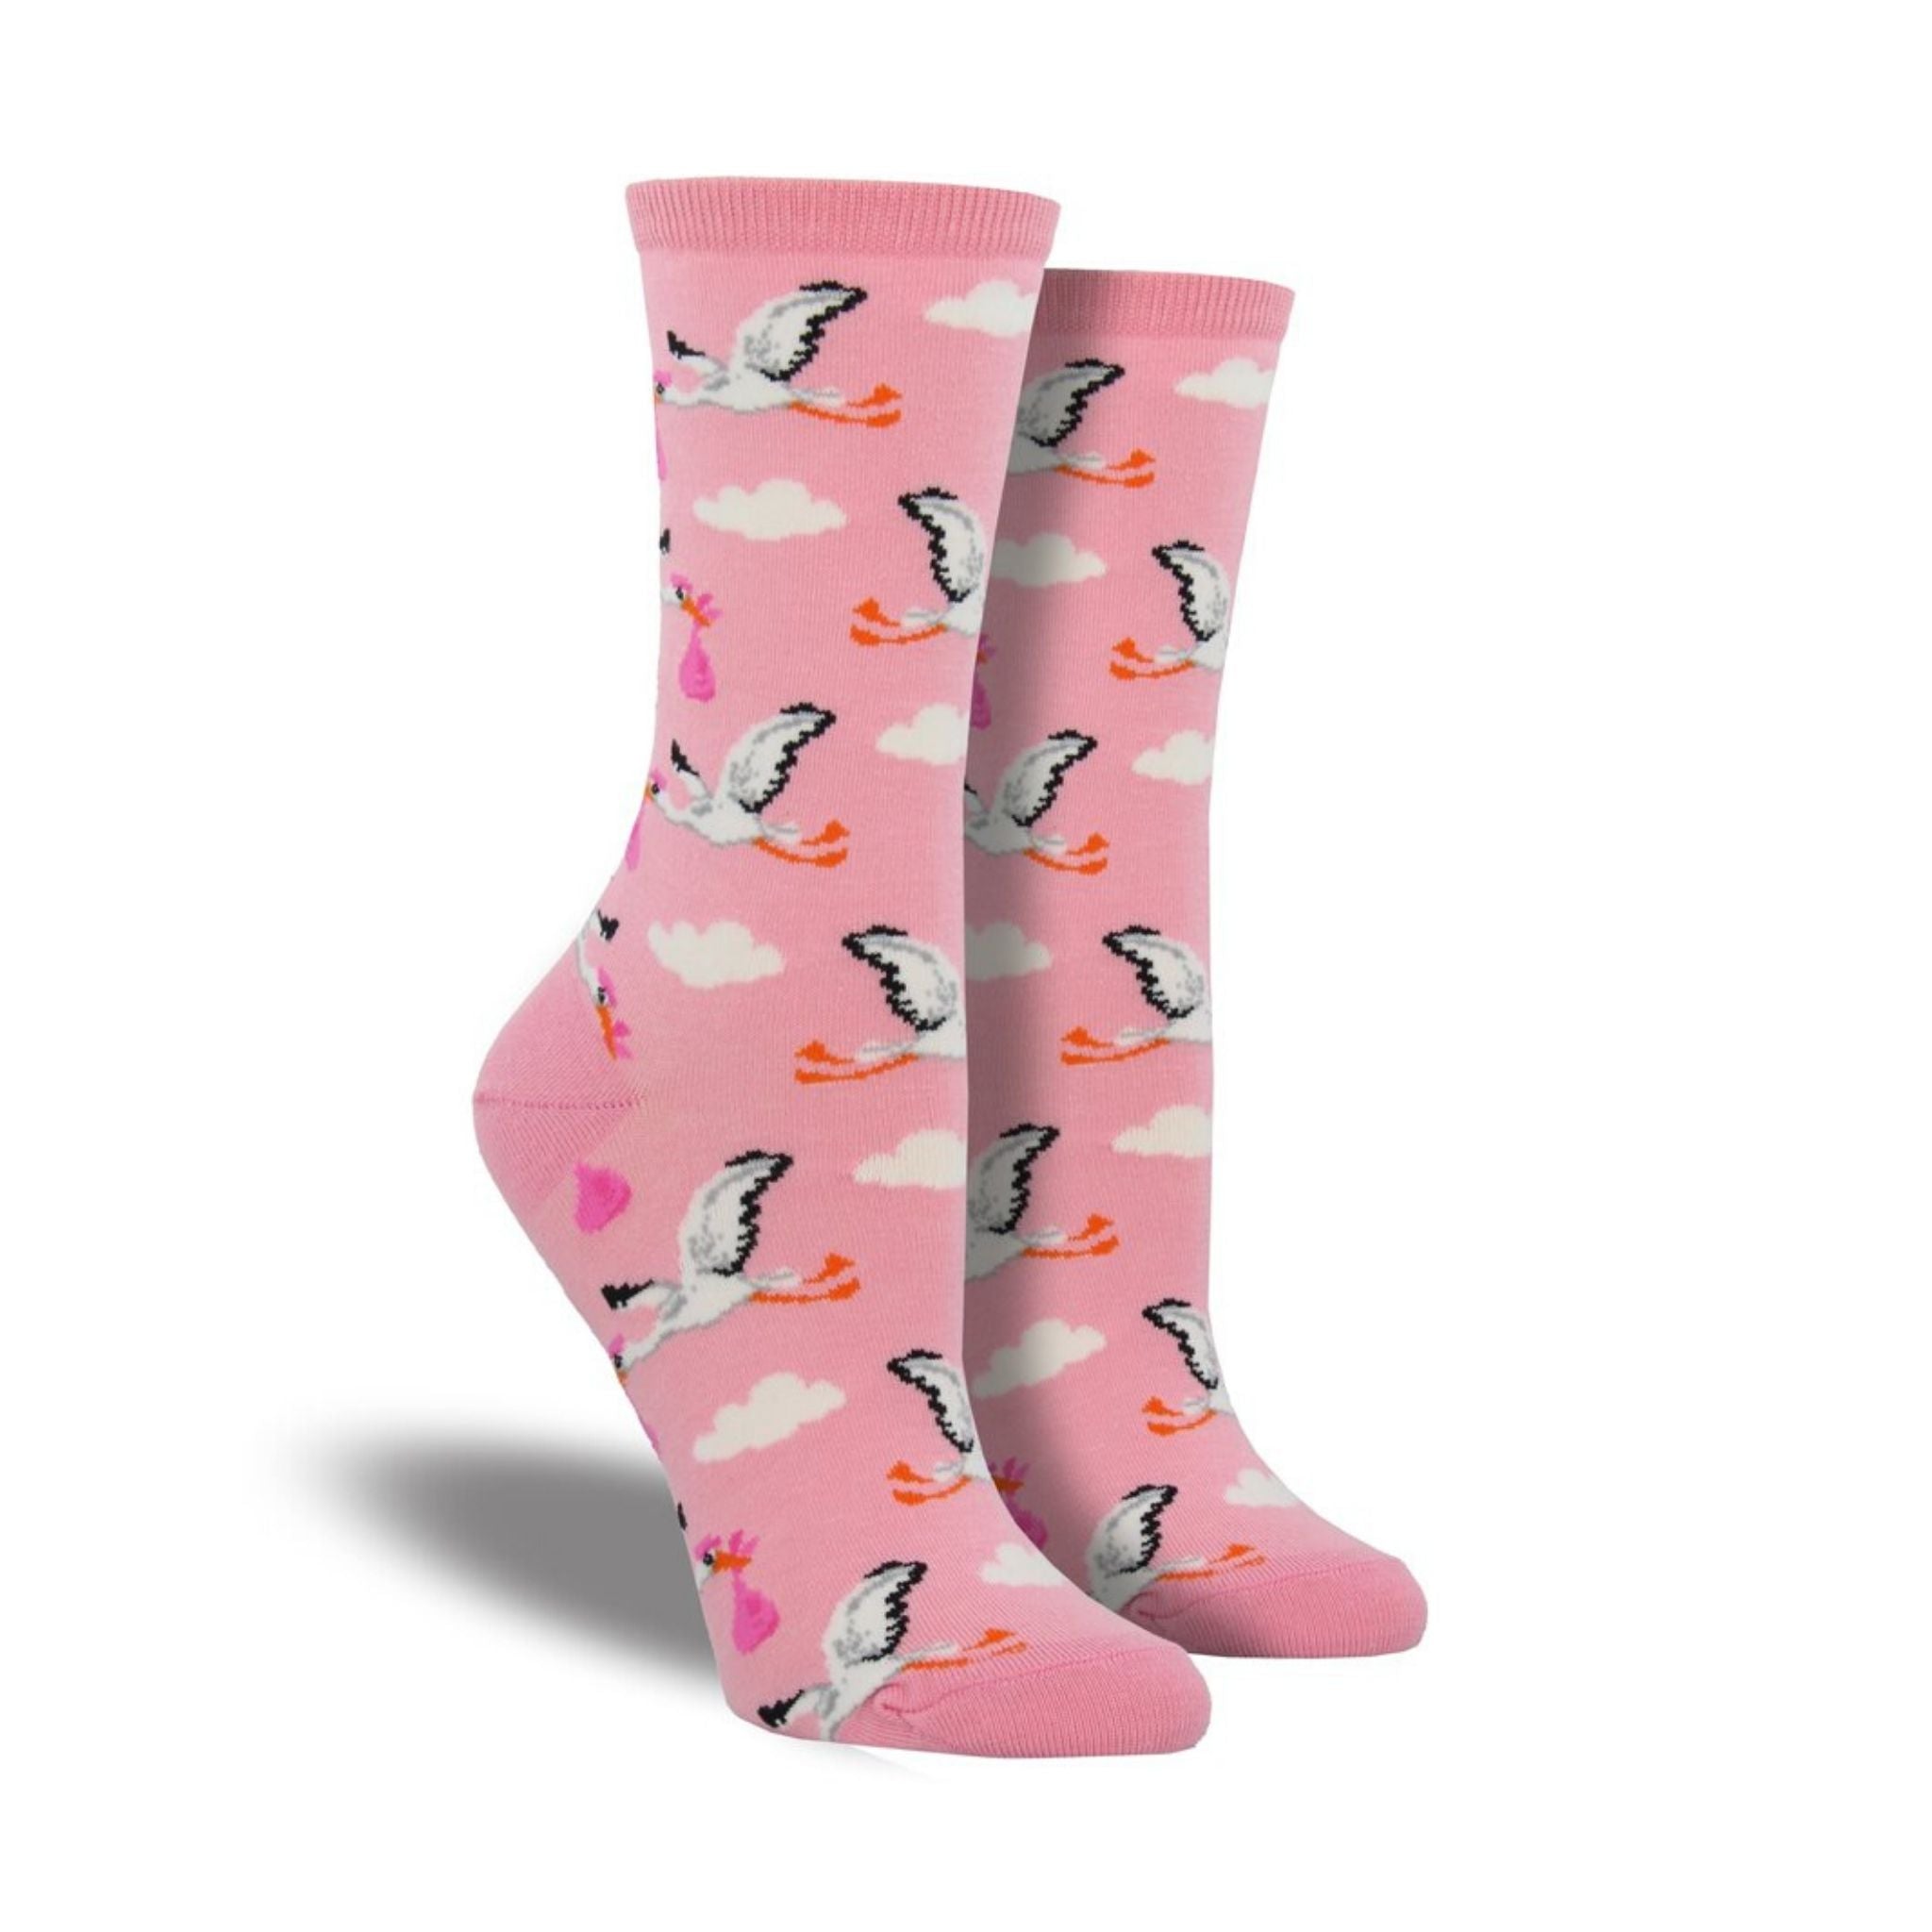 Pink socks featuring the stork delivering a baby